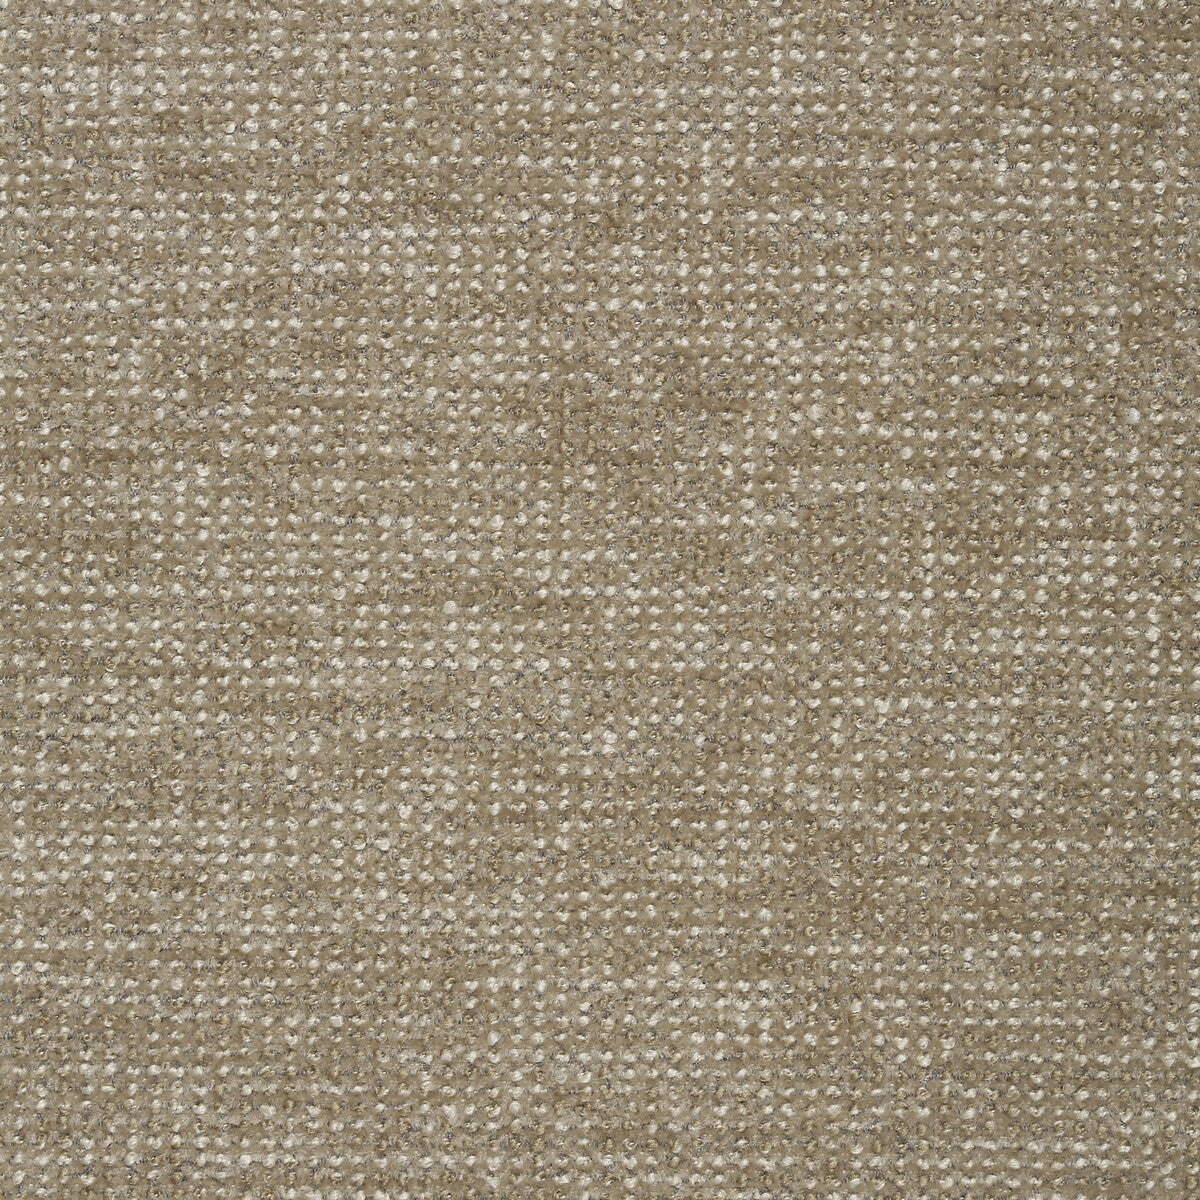 Kravet Contract fabric in 35116-106 color - pattern 35116.106.0 - by Kravet Contract in the Crypton Incase collection